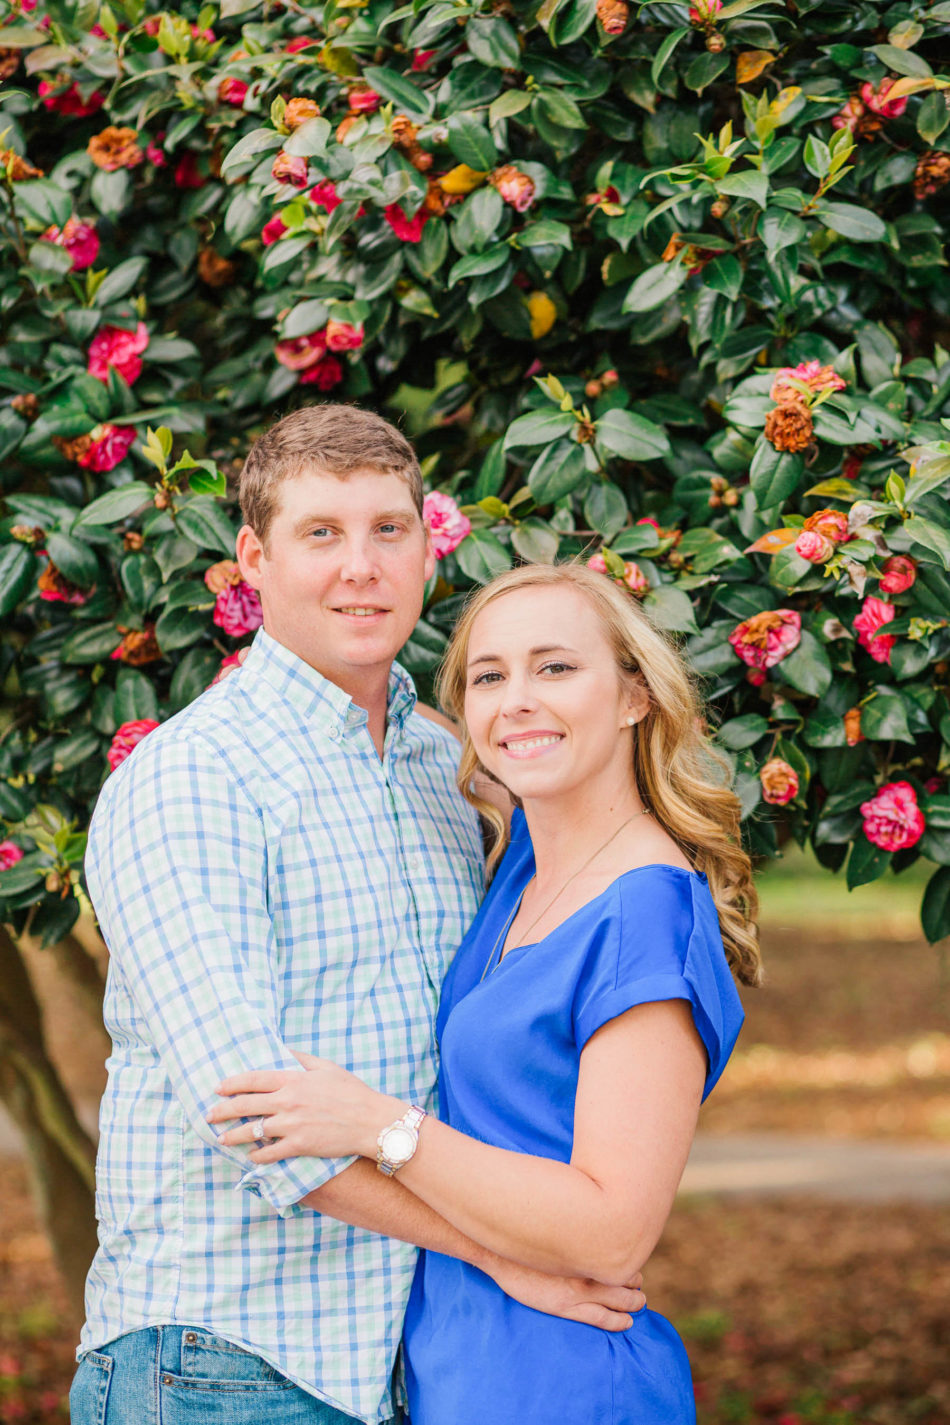 Engaged couple poses in front of tree with red flowers, Hampton Park, Charleston, South Carolina Kate Timbers Photography. http://katetimbers.com #katetimbersphotography // Charleston Photography // Inspiration